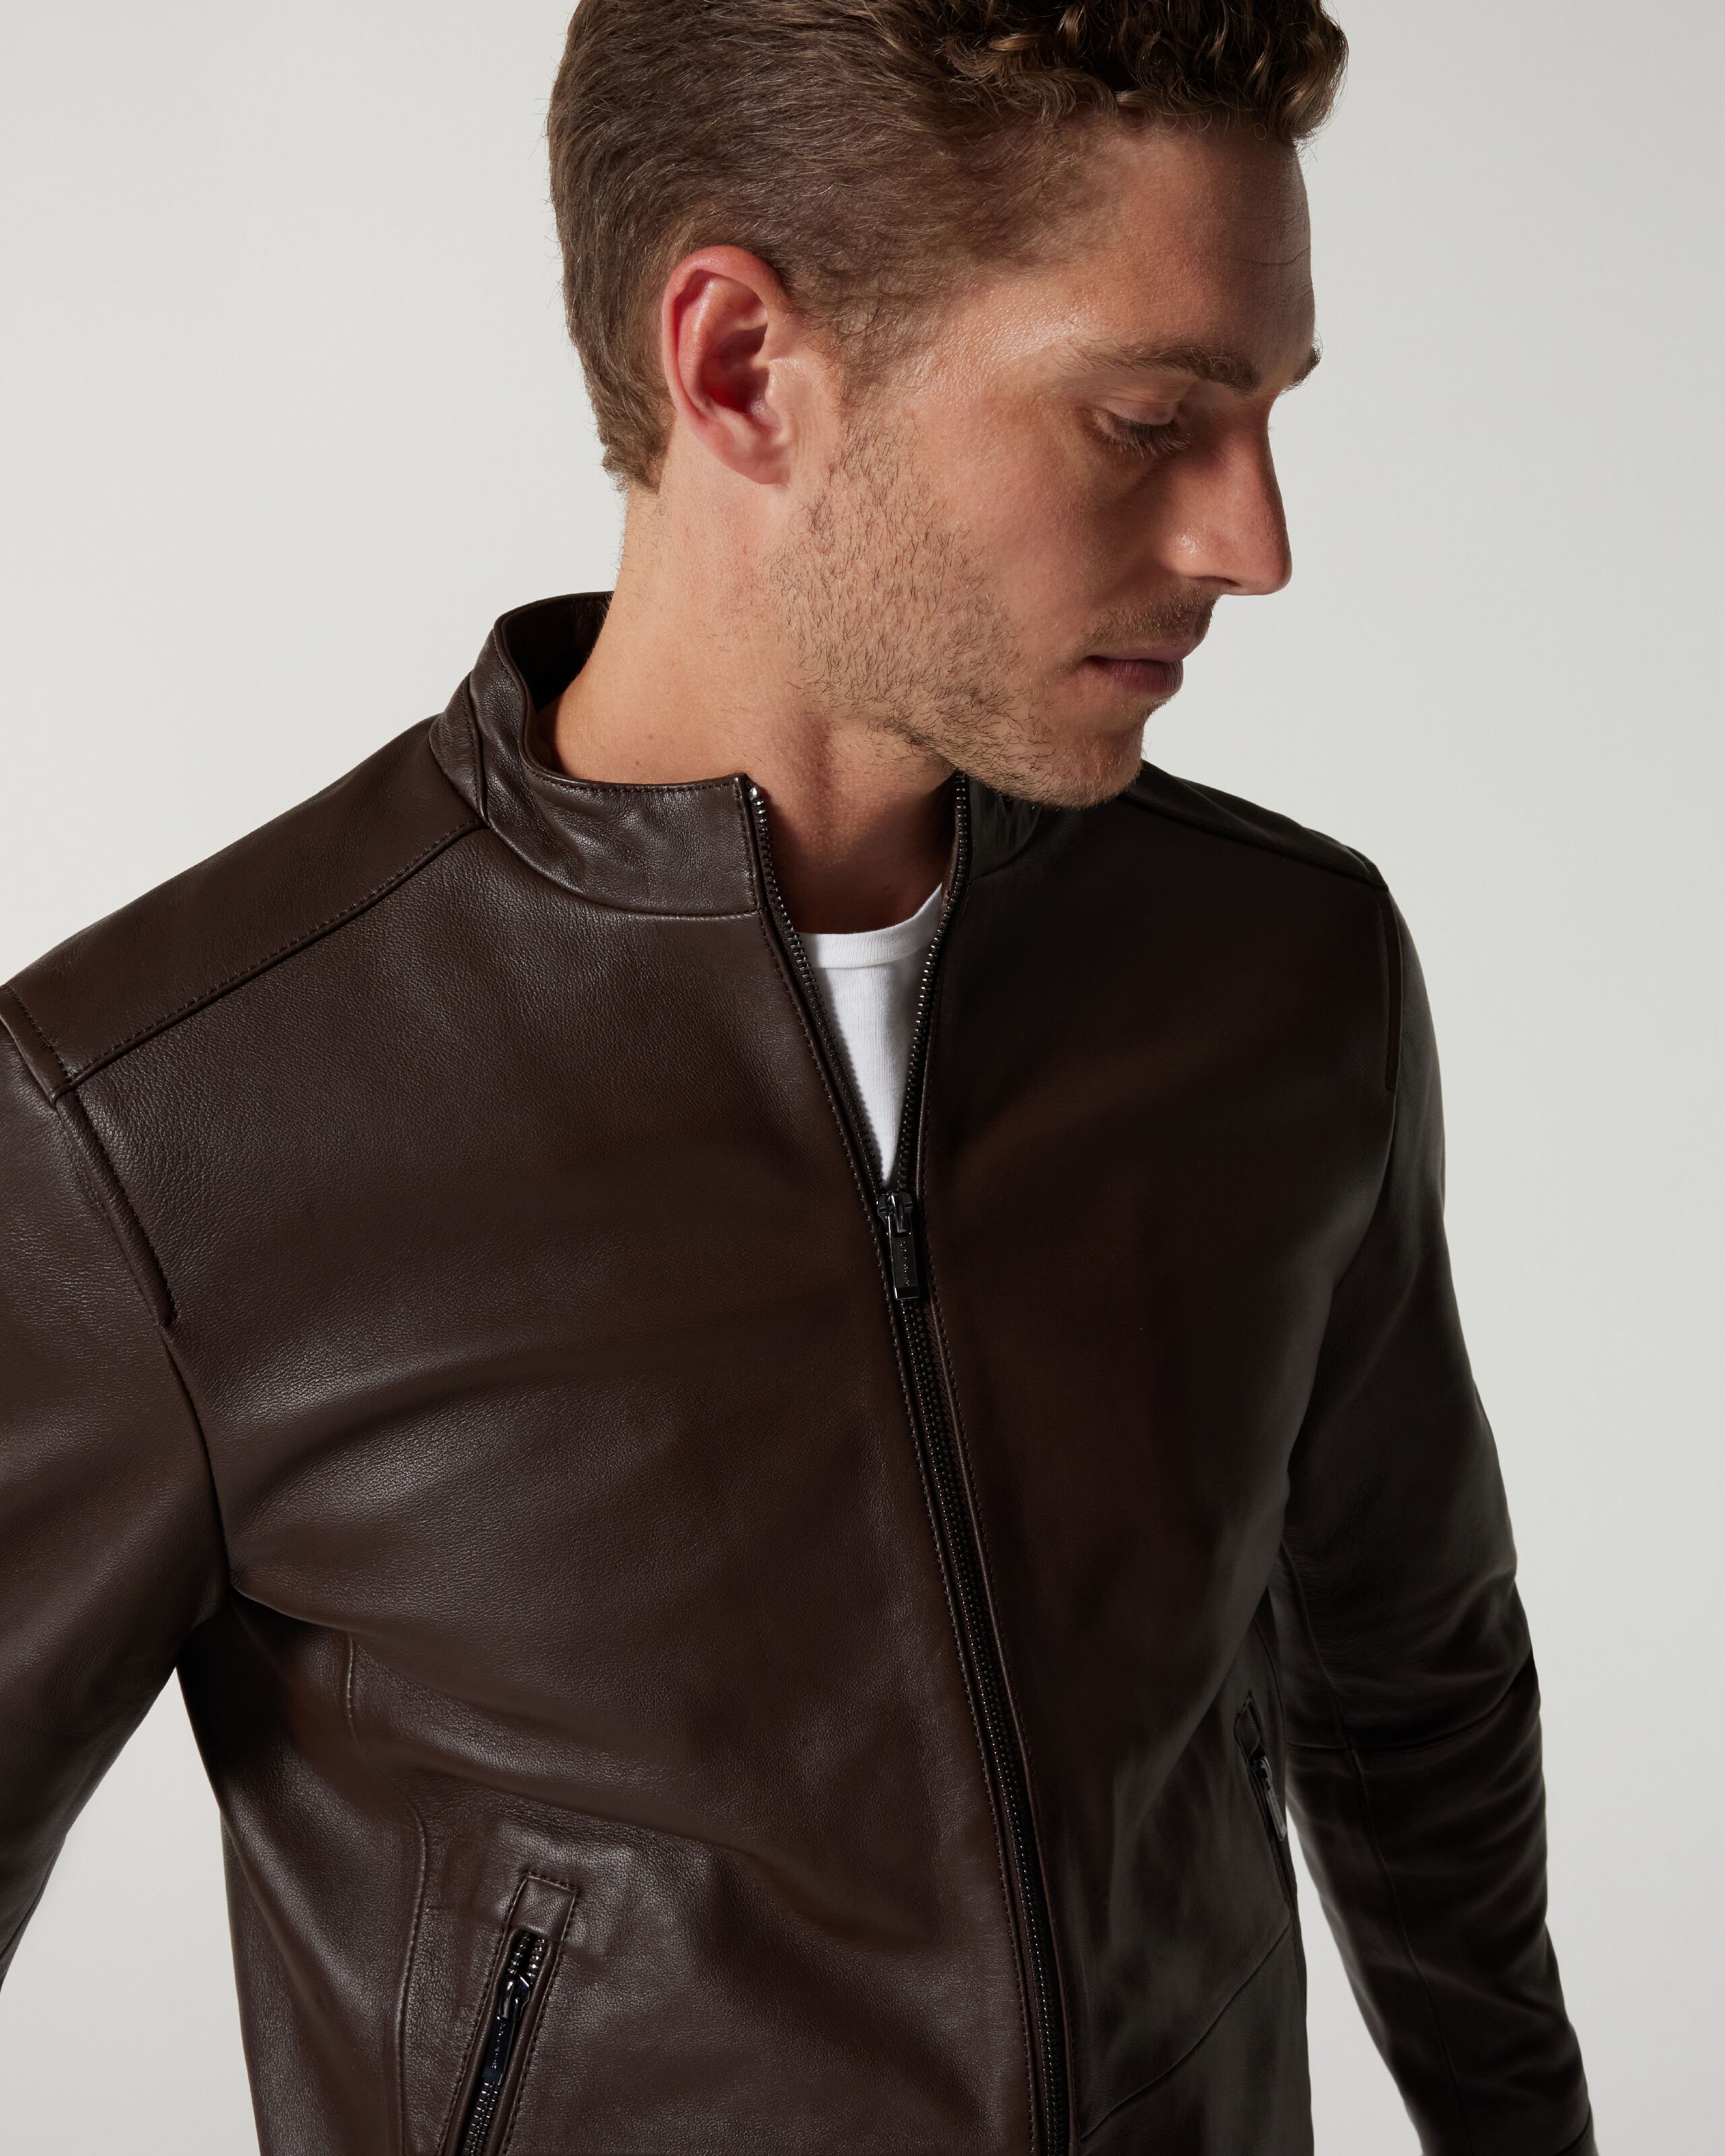 How to Buy Your First Leather Jacket — The Essential Man